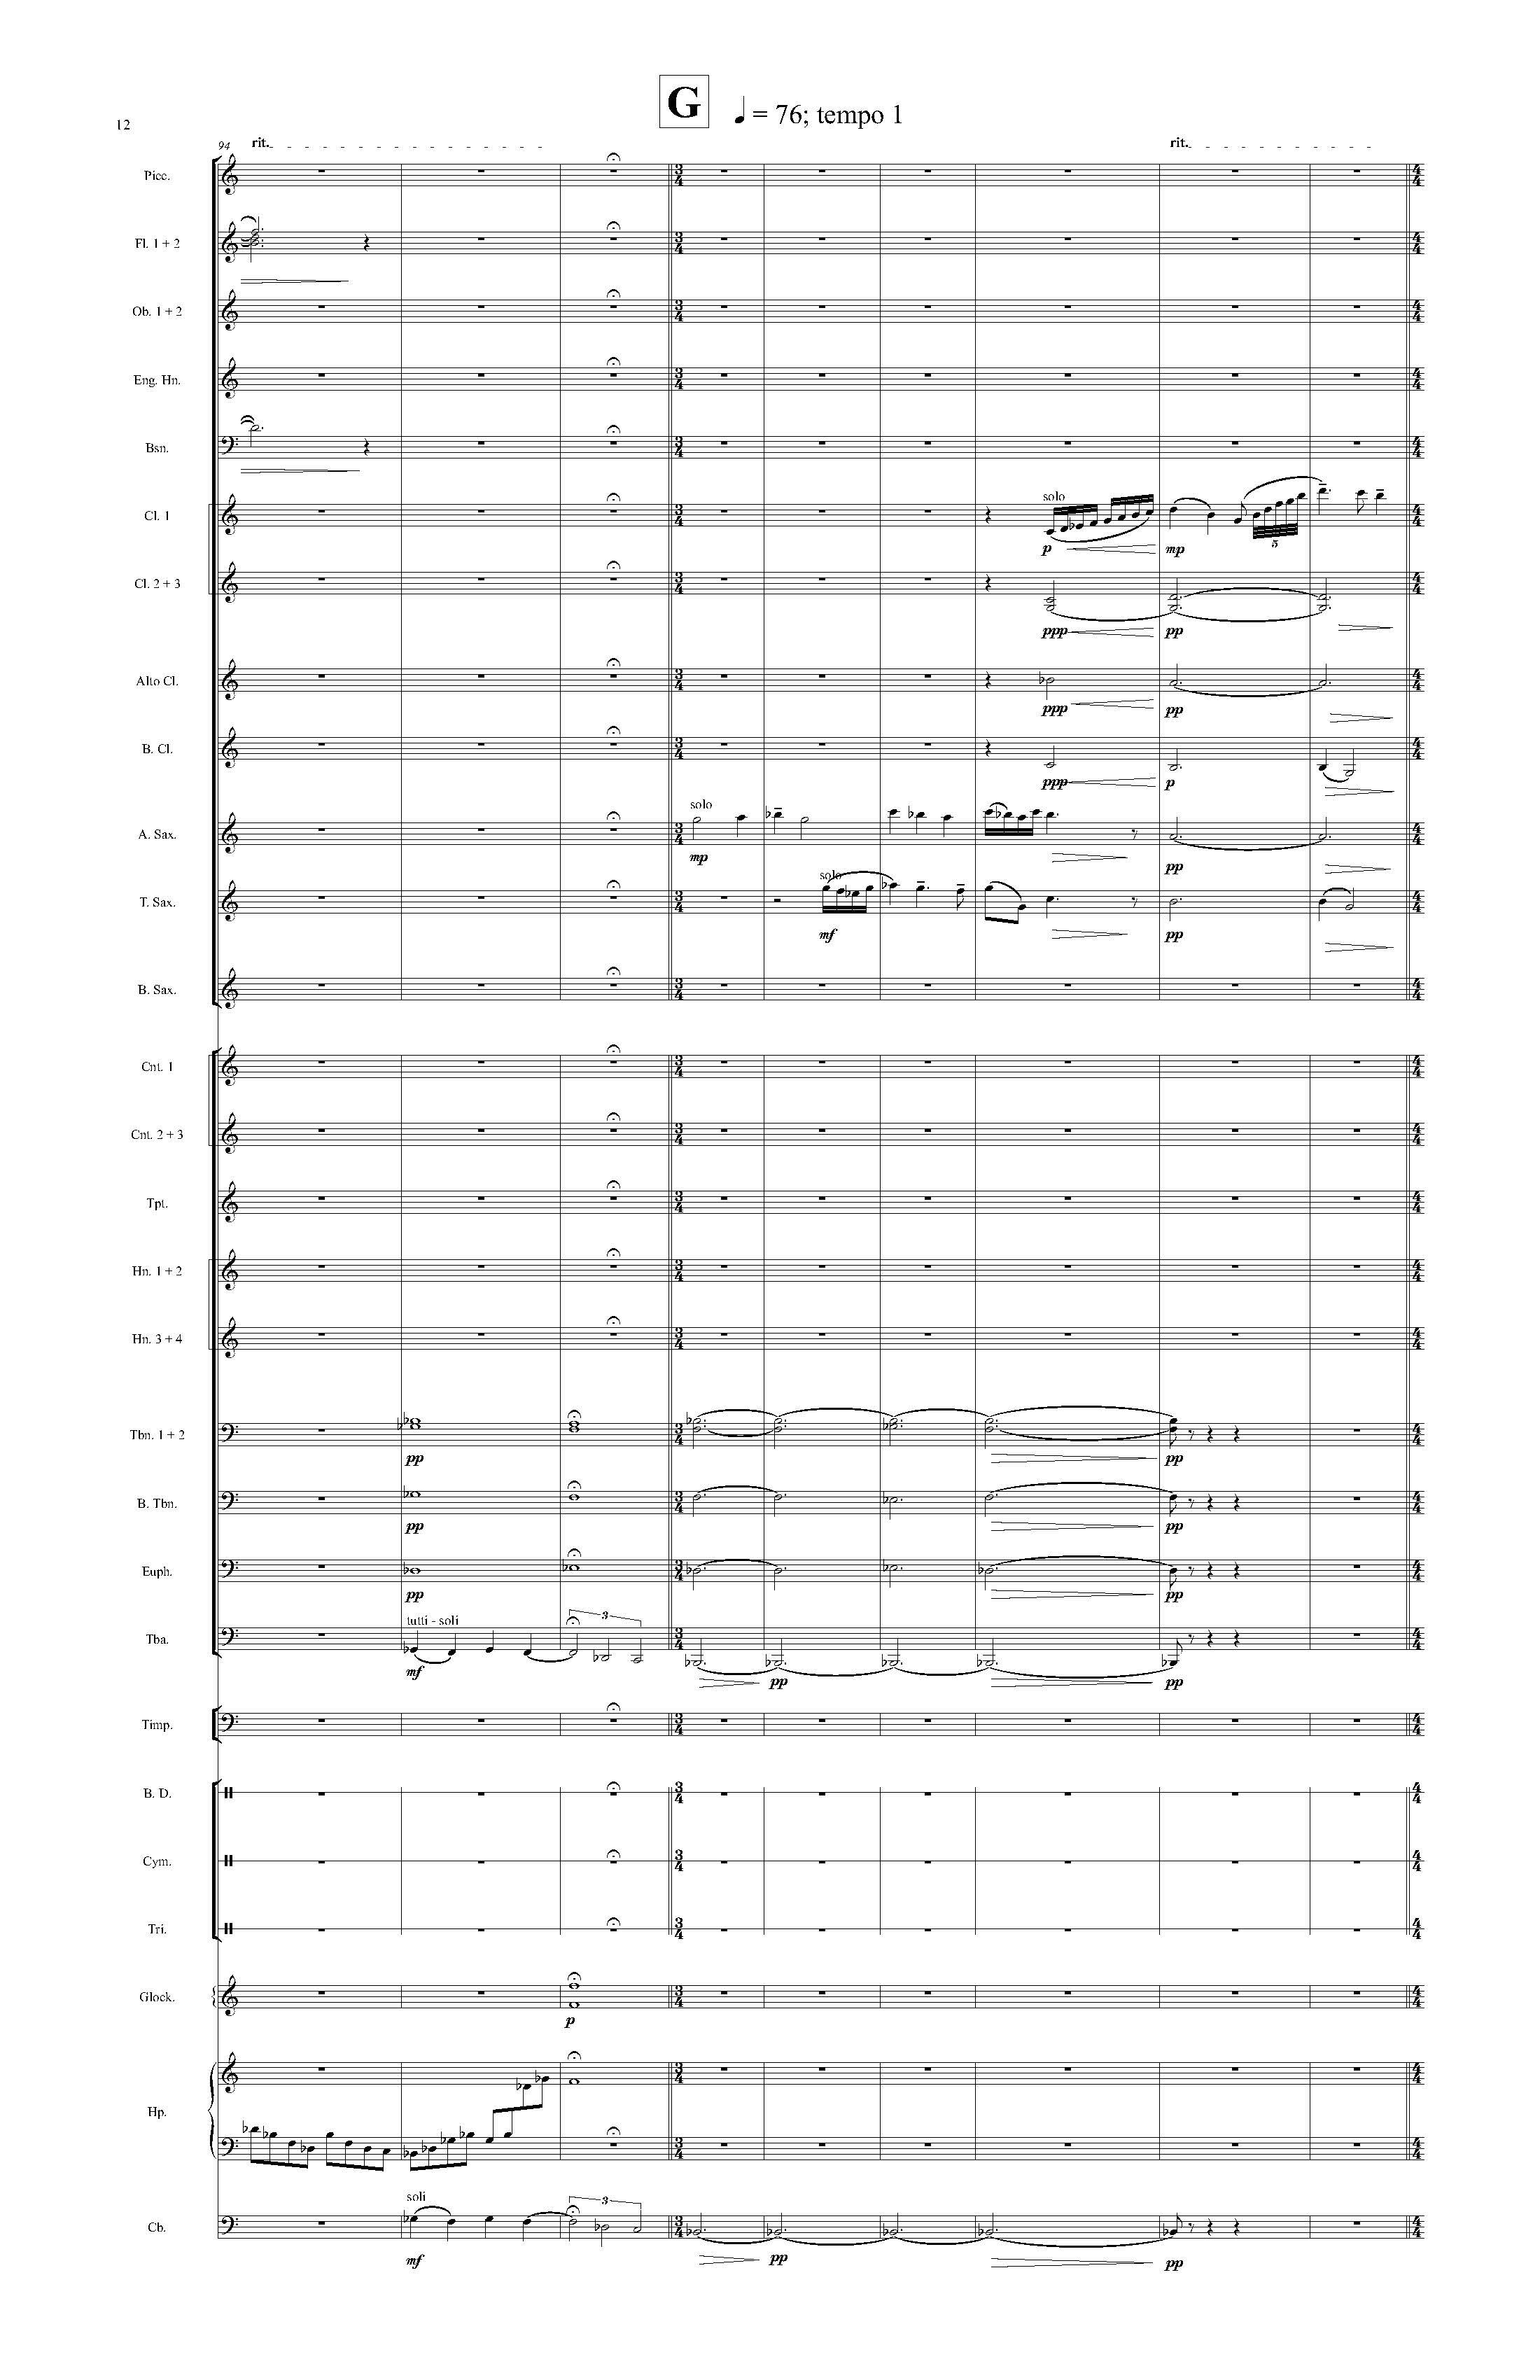 Psyche - Complete Score_Page_18.jpg